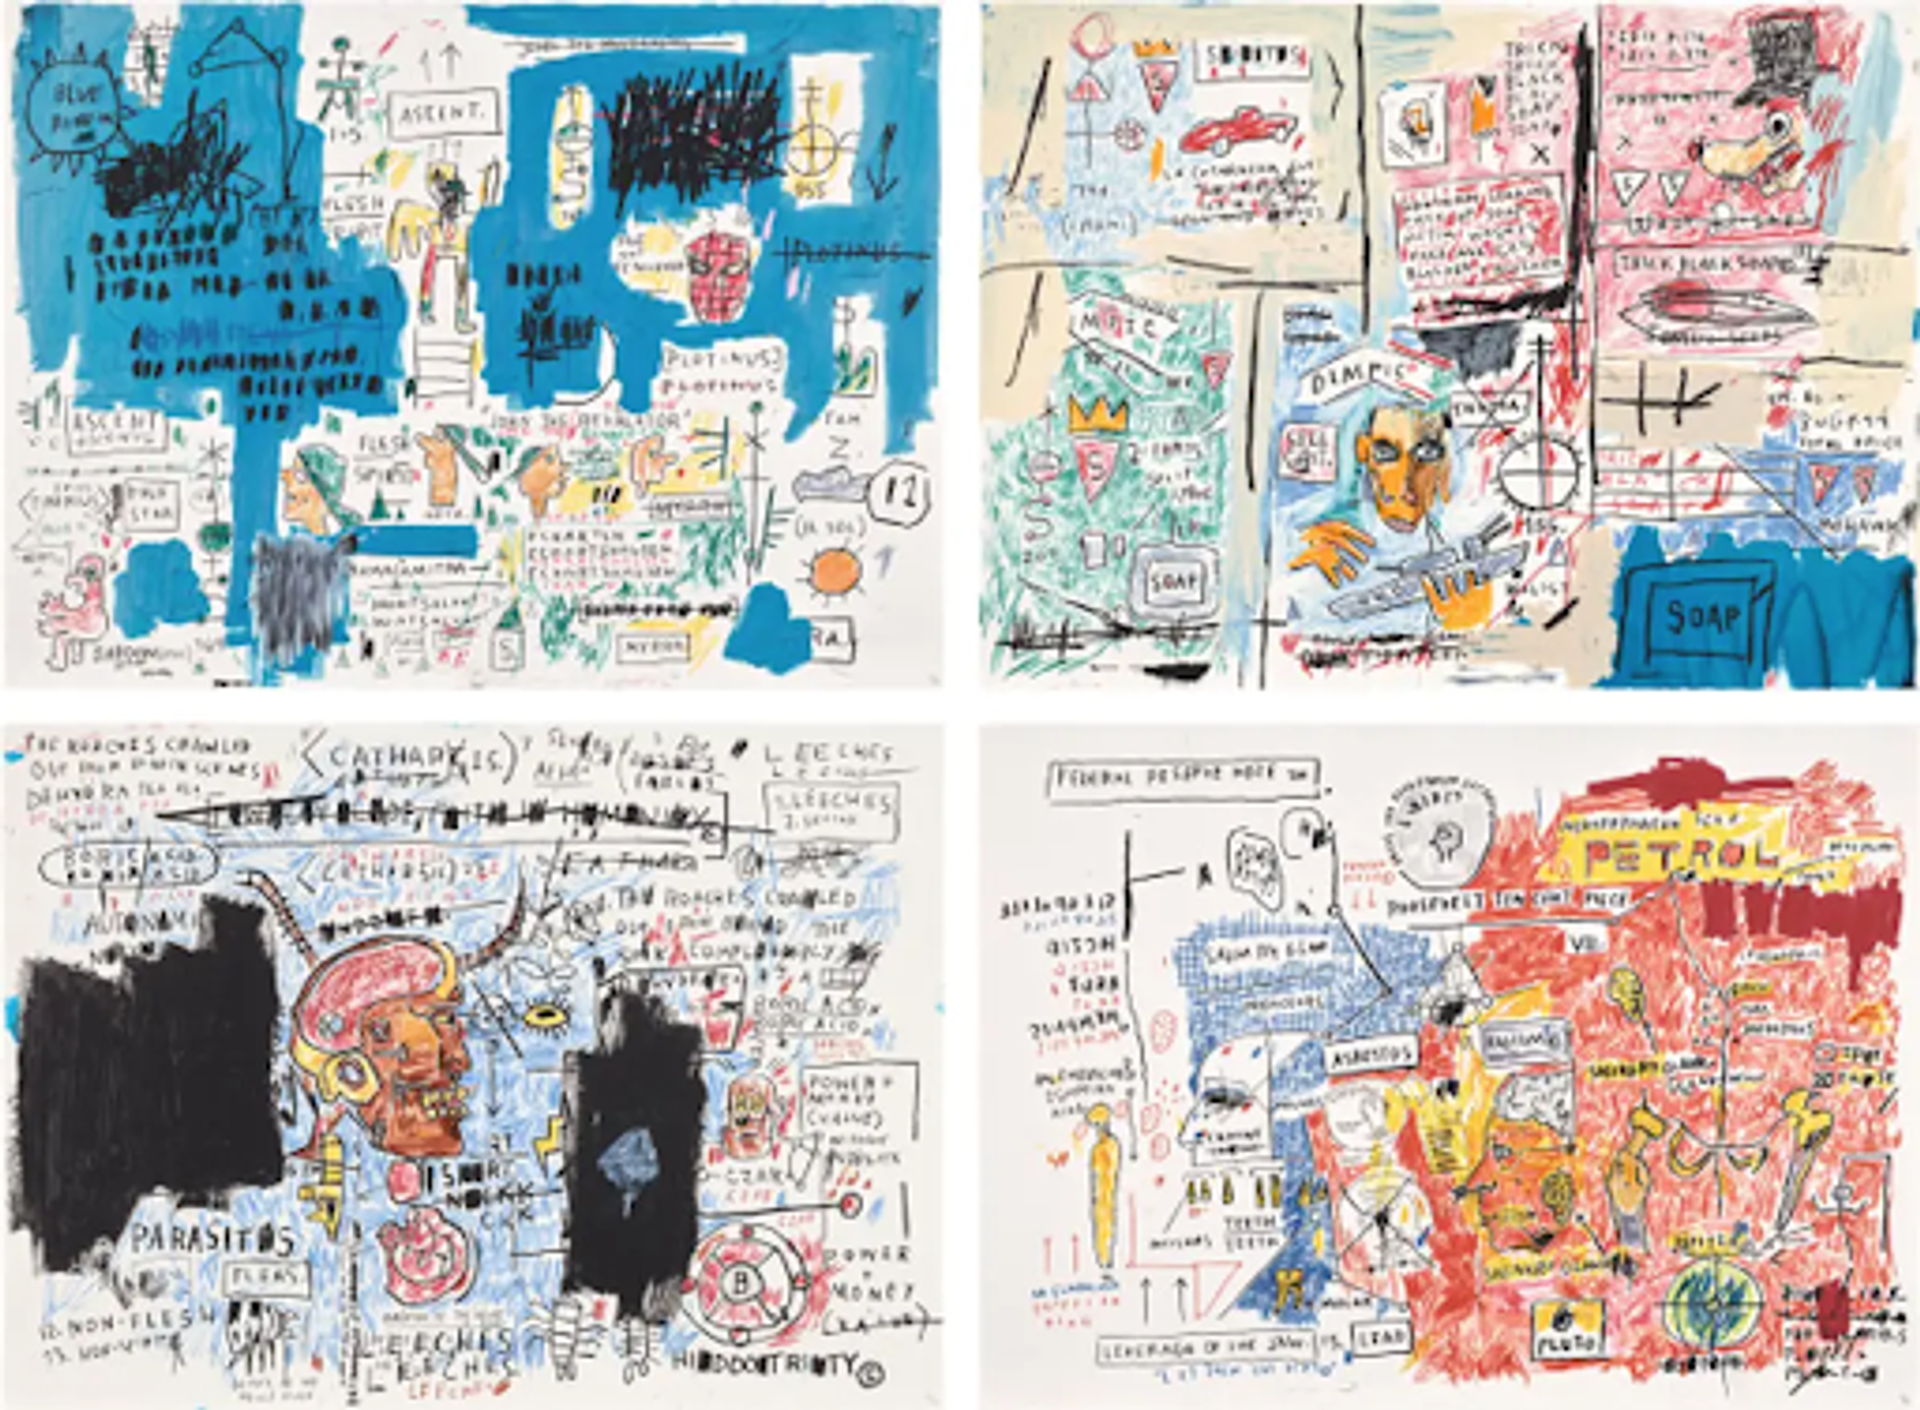 Jean-Michel Basquiat’s Daros Suite. A Neo Expressionist screenprint featuring four of Basquiat’s works in the series: Ascent, Olympic, Leeches, and Liberty. 